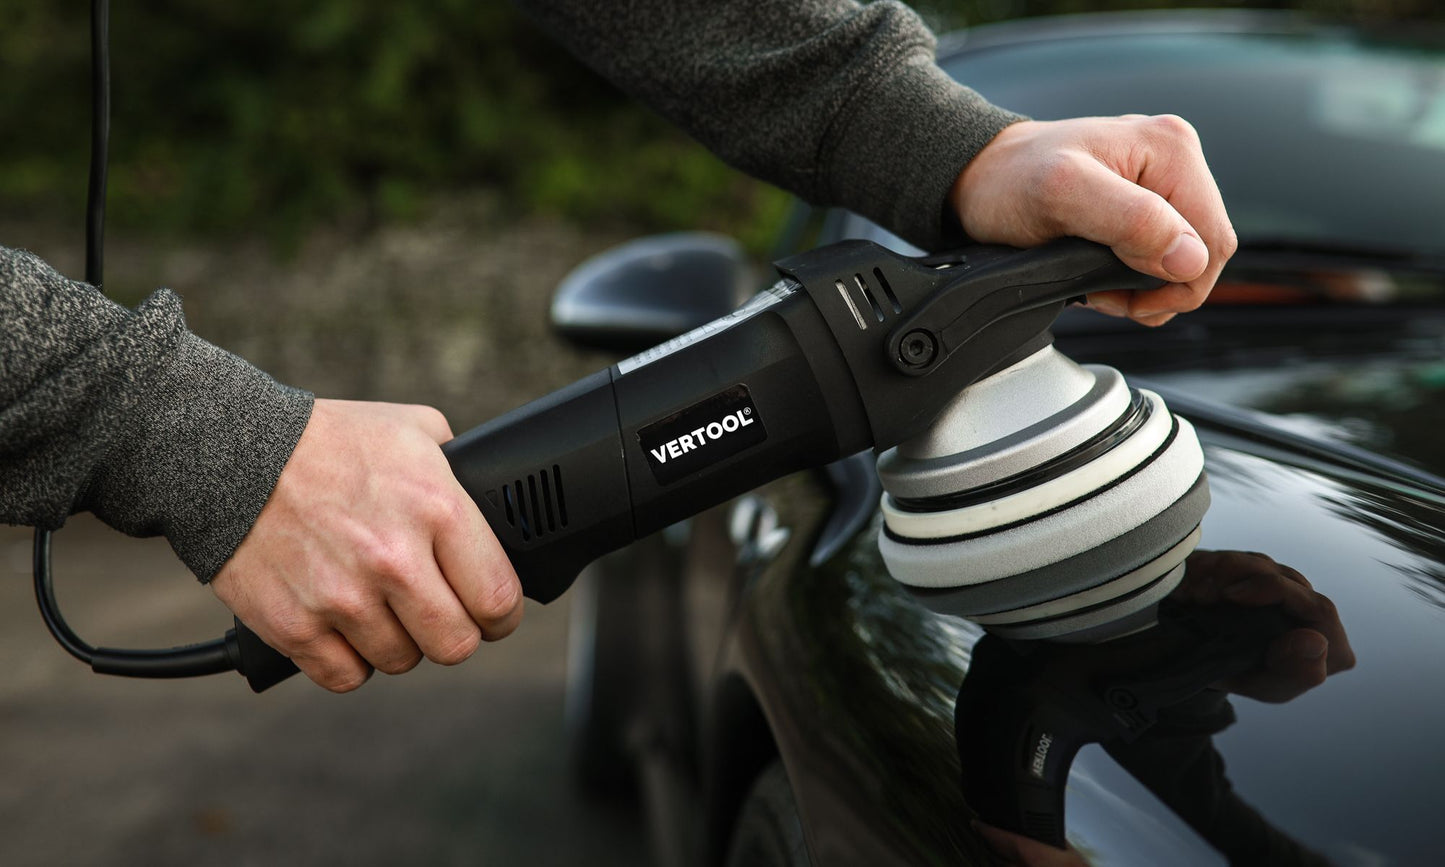 Vertool Force Drive Dual Action Polisher